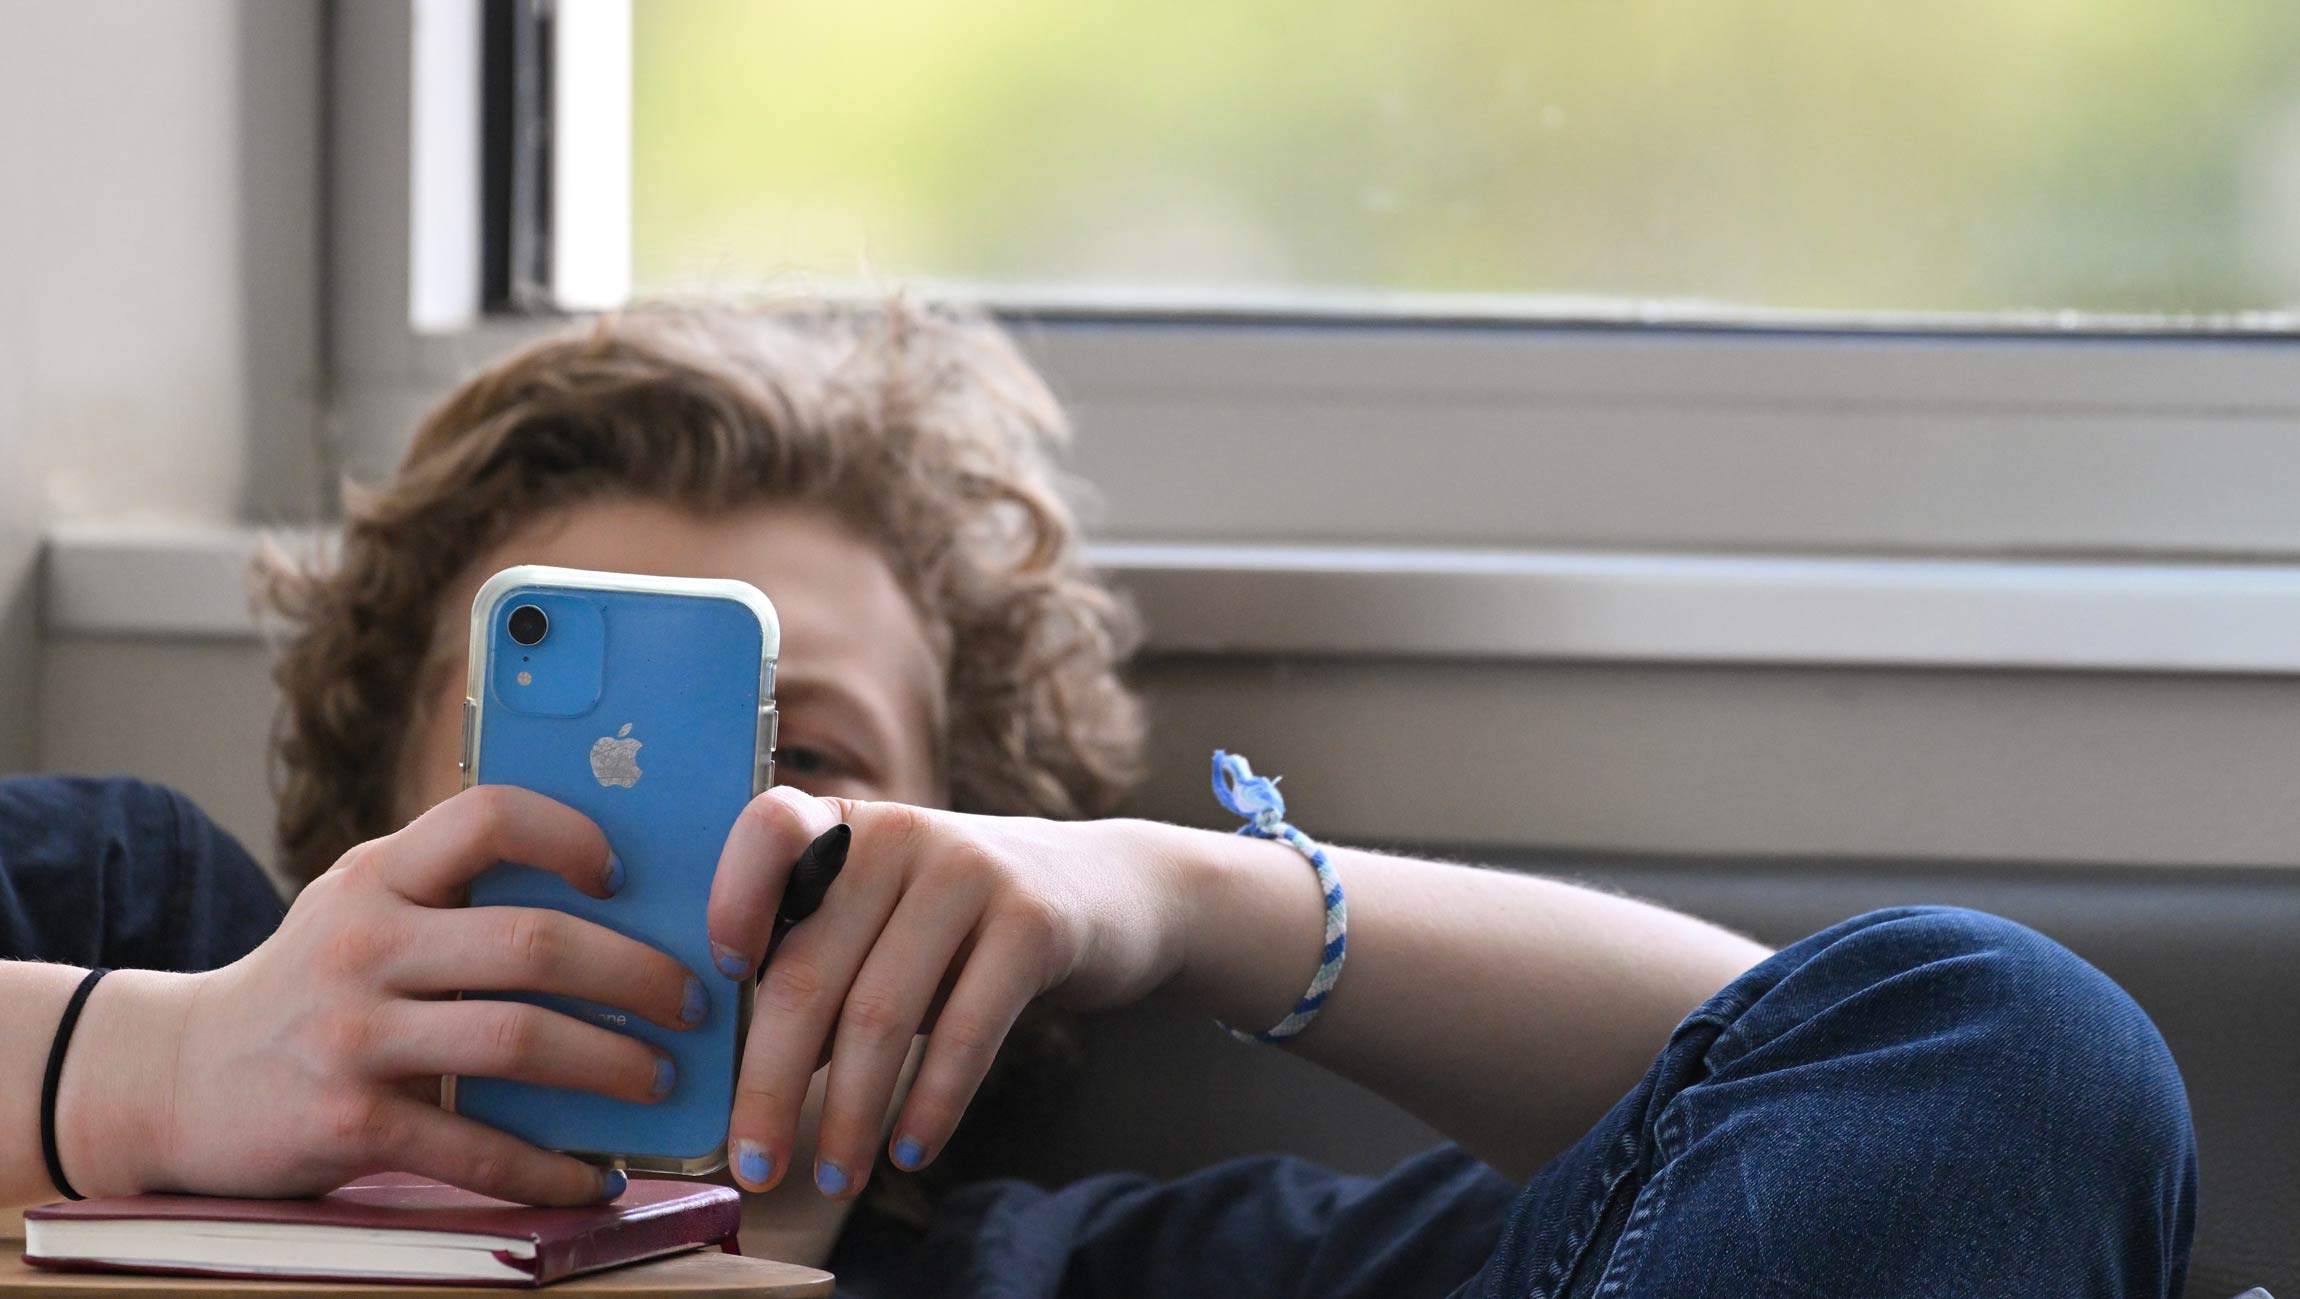 Article thumbnail for WVU research reveals possible link between teen personalities, social media preferences and depressive symptoms